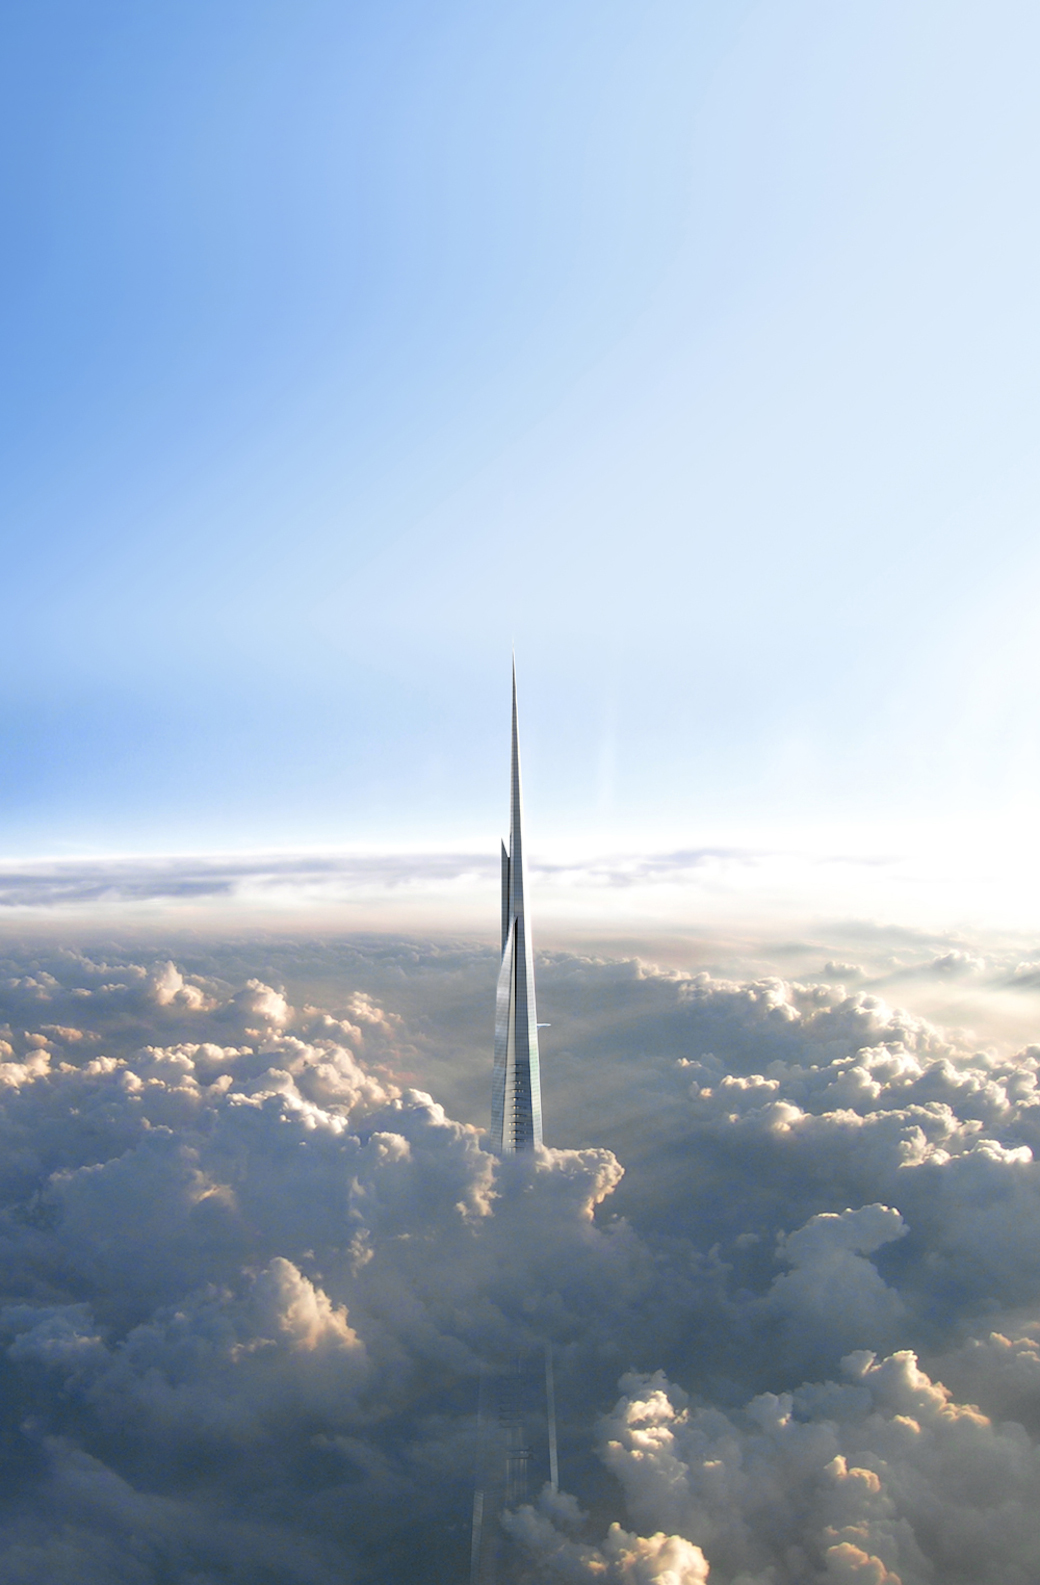 The World&#8217;s New Tallest Building that no one is happy about &#8211; Kingdom Tower